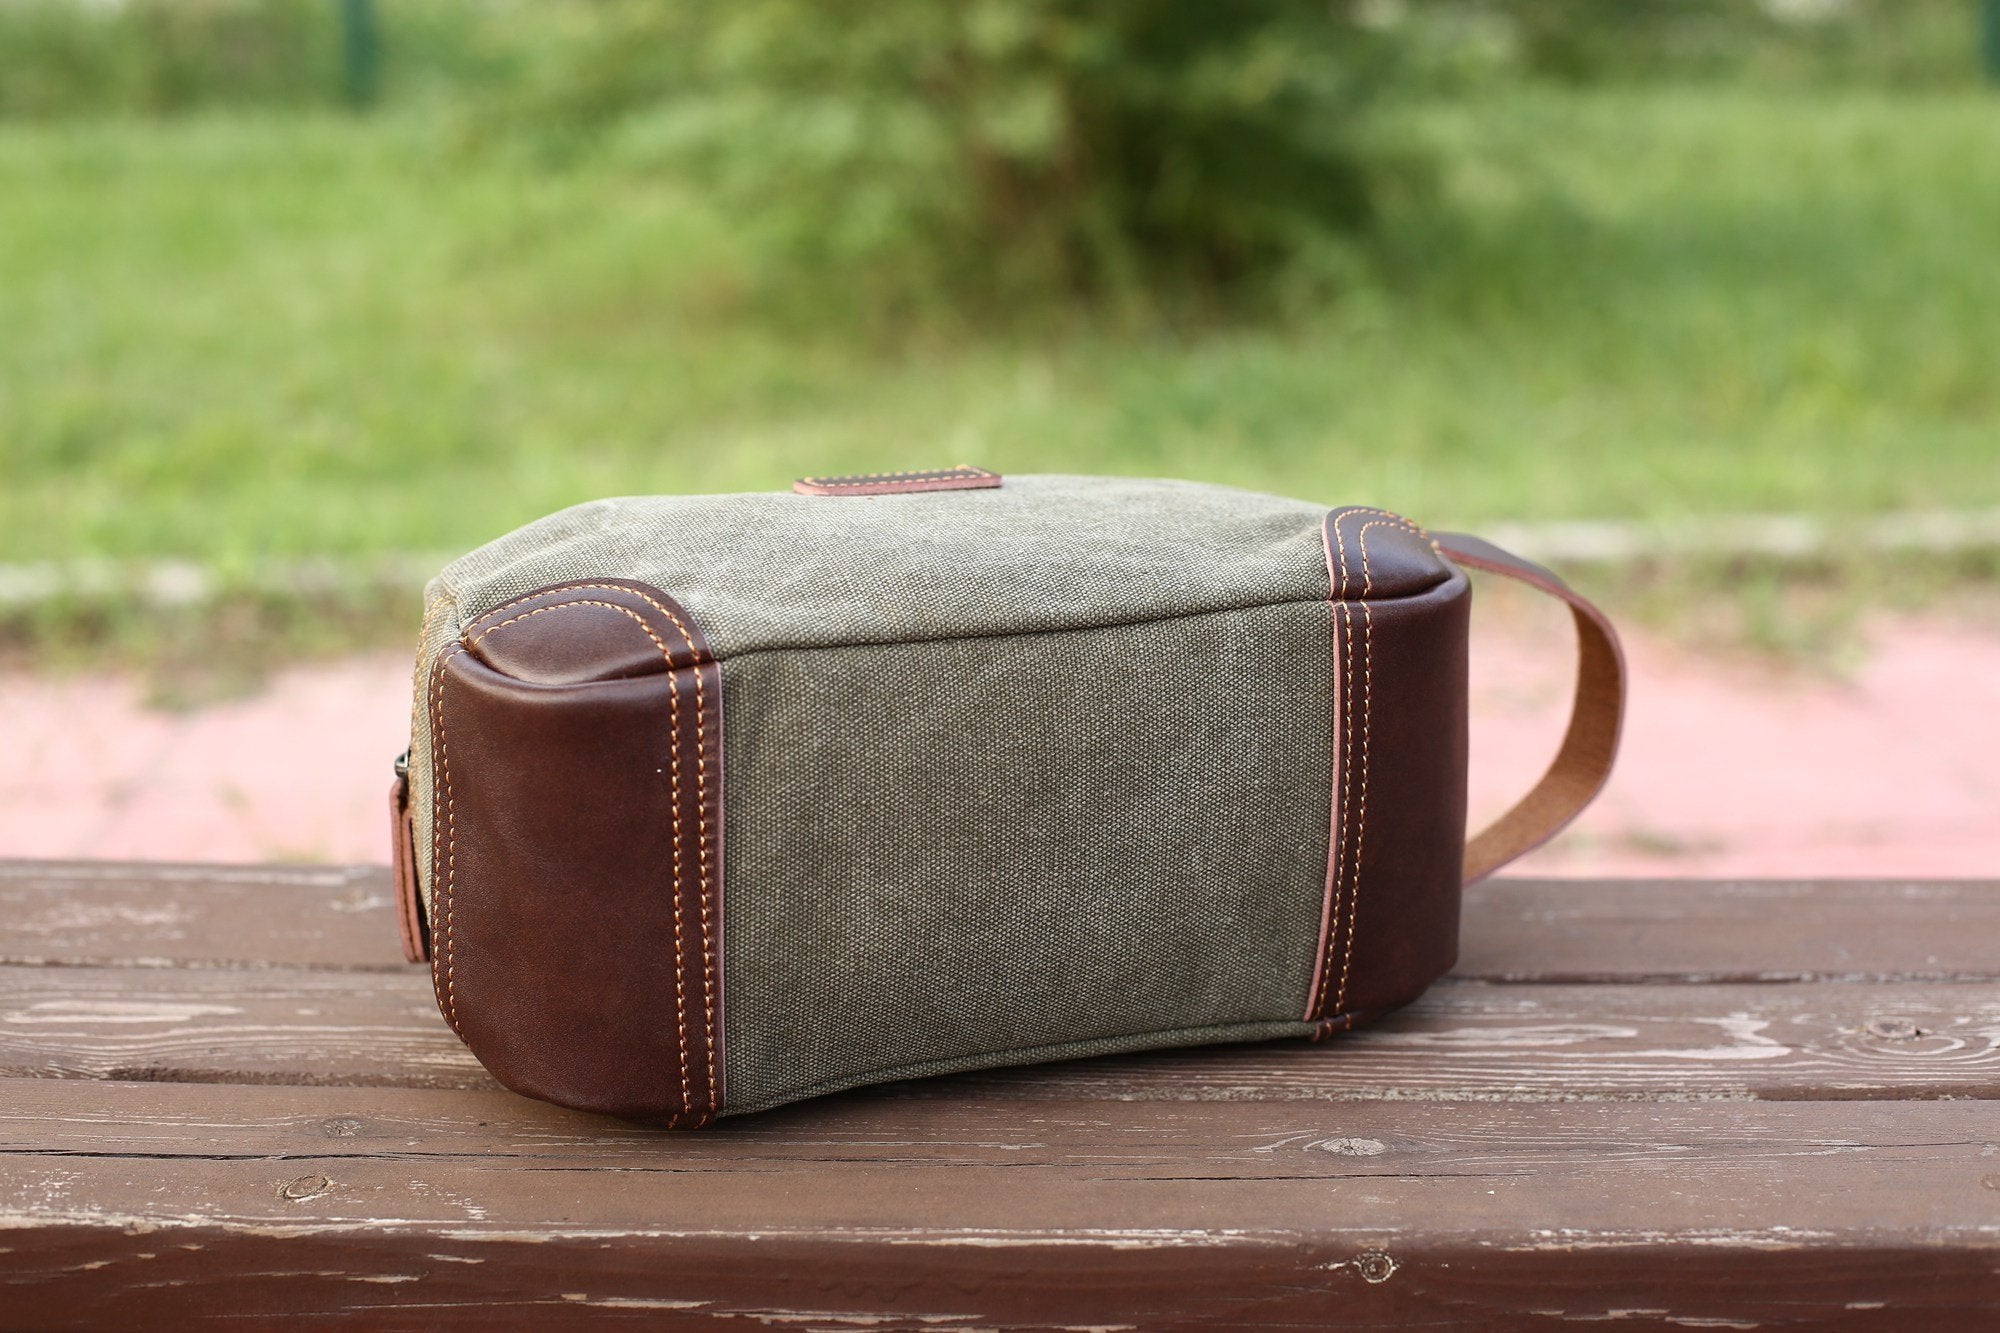 Monogrammed Hanging Toiletry Bag for Men - Canvas with Leather Straps -  Groovy Guy Gifts